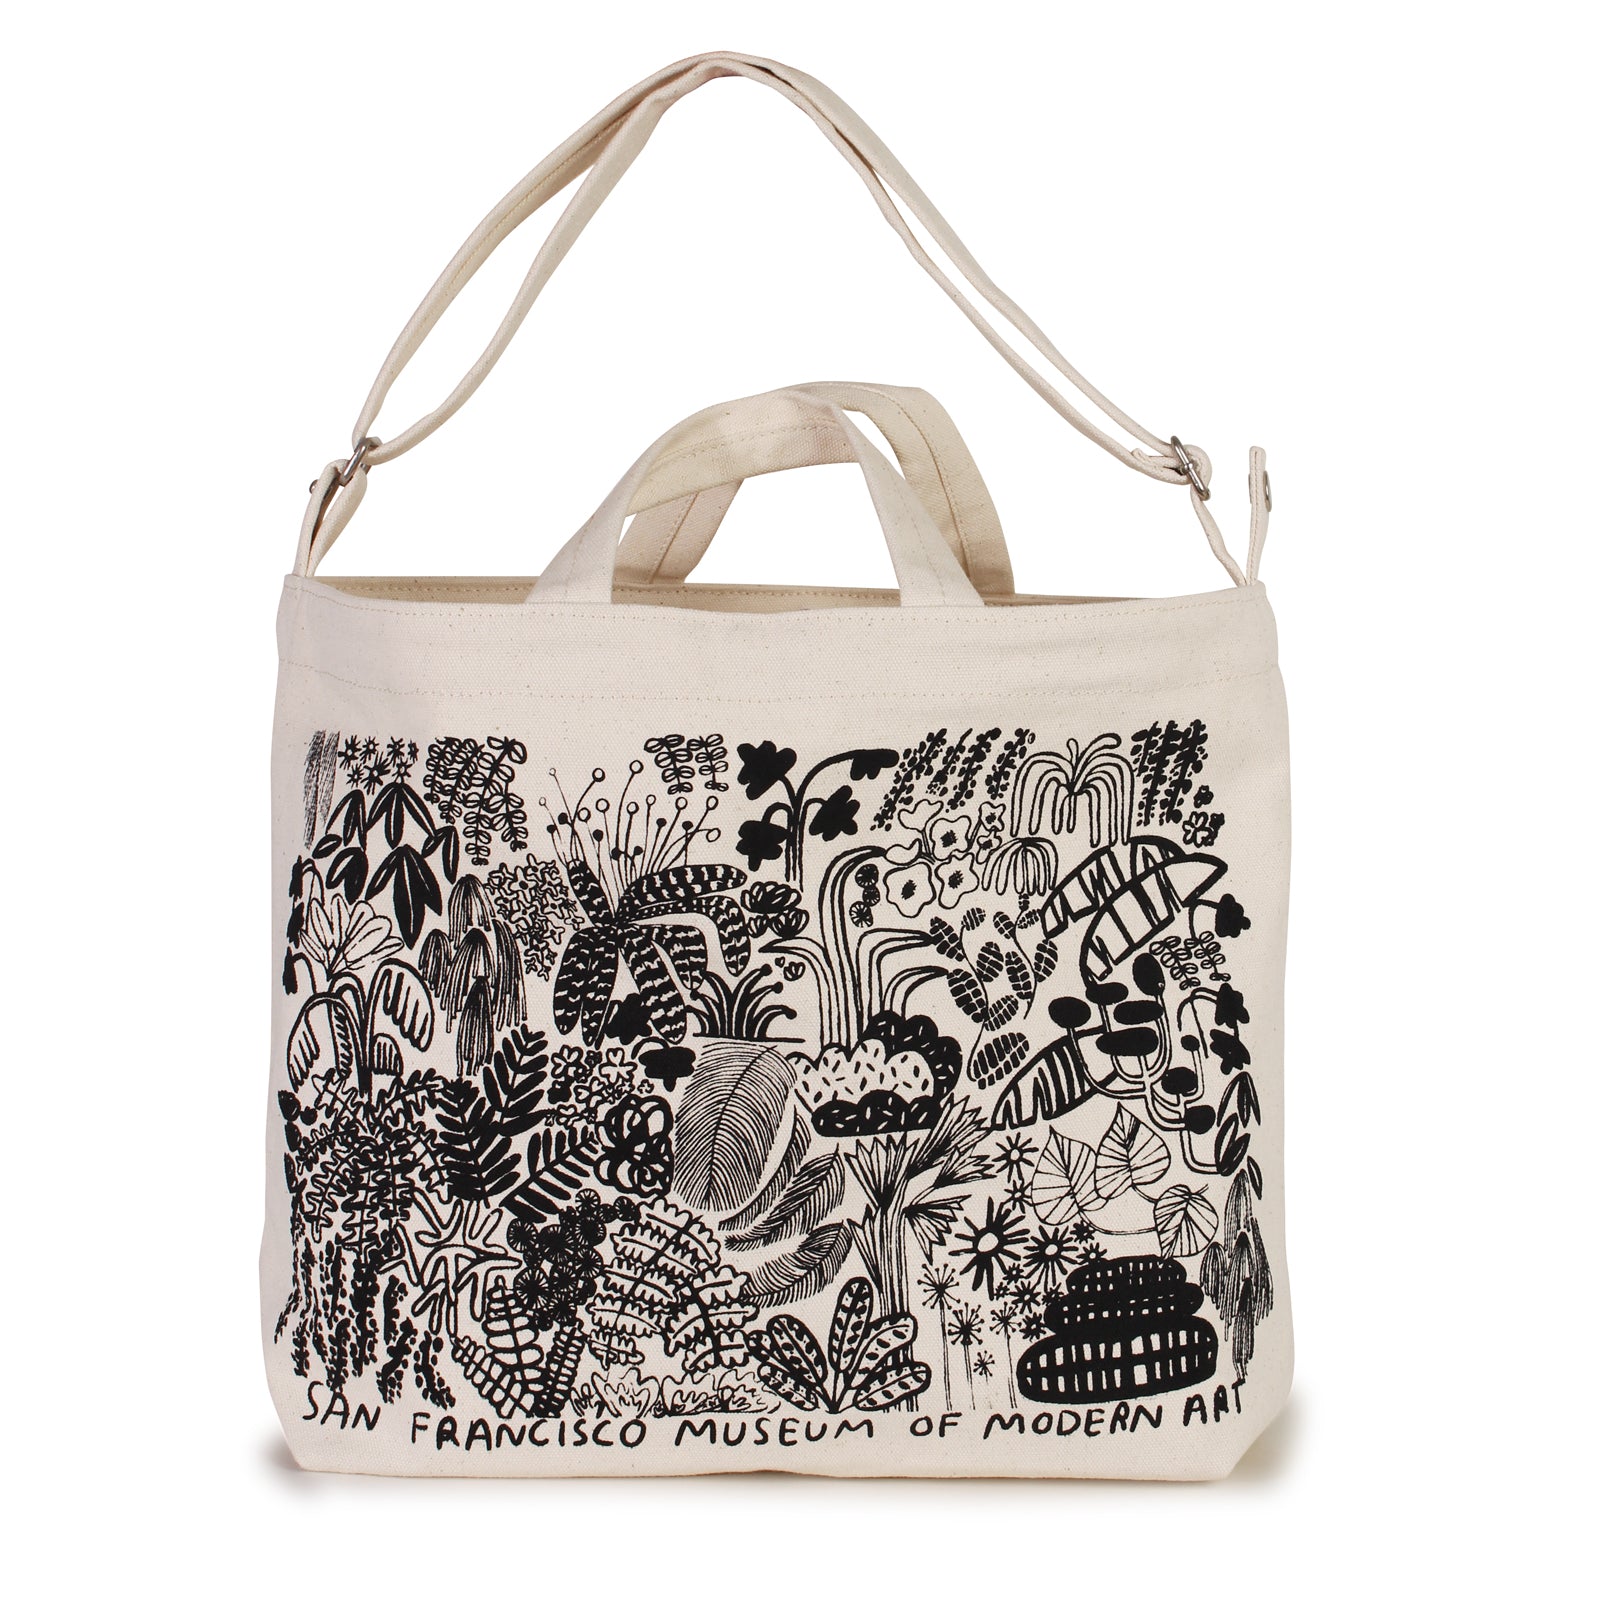 The SFMOMA x Carissa Potter Tote displayed with its with strap and handles up.